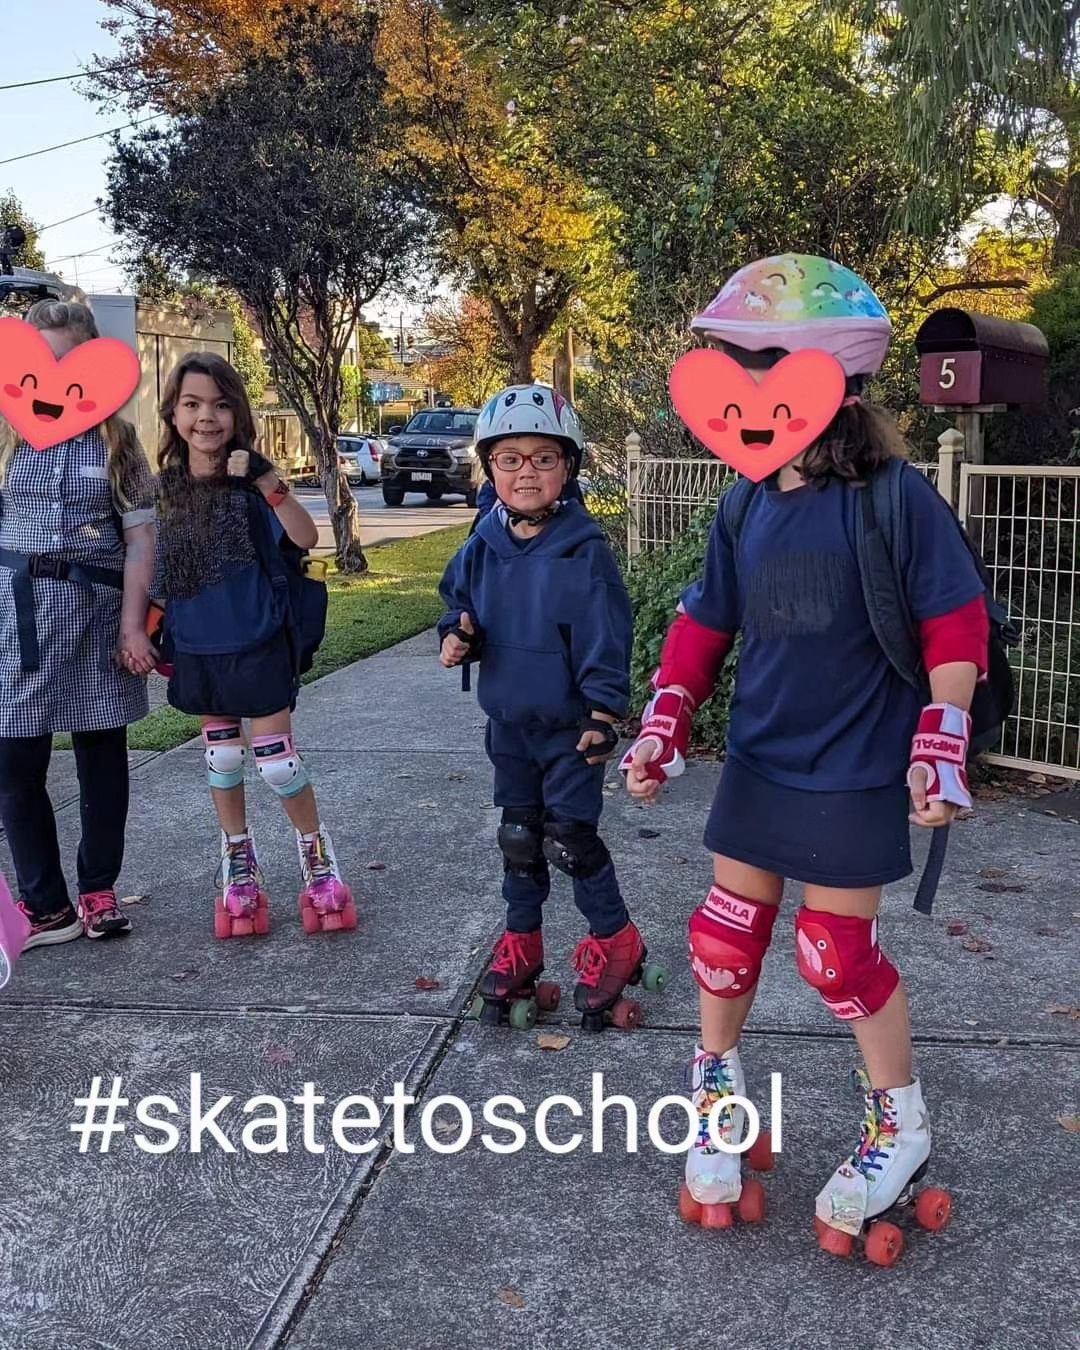 We are loving this new morning routine! Skating to school!! Little brother and a neighbour is now joining us ❤️
#skatetoschool